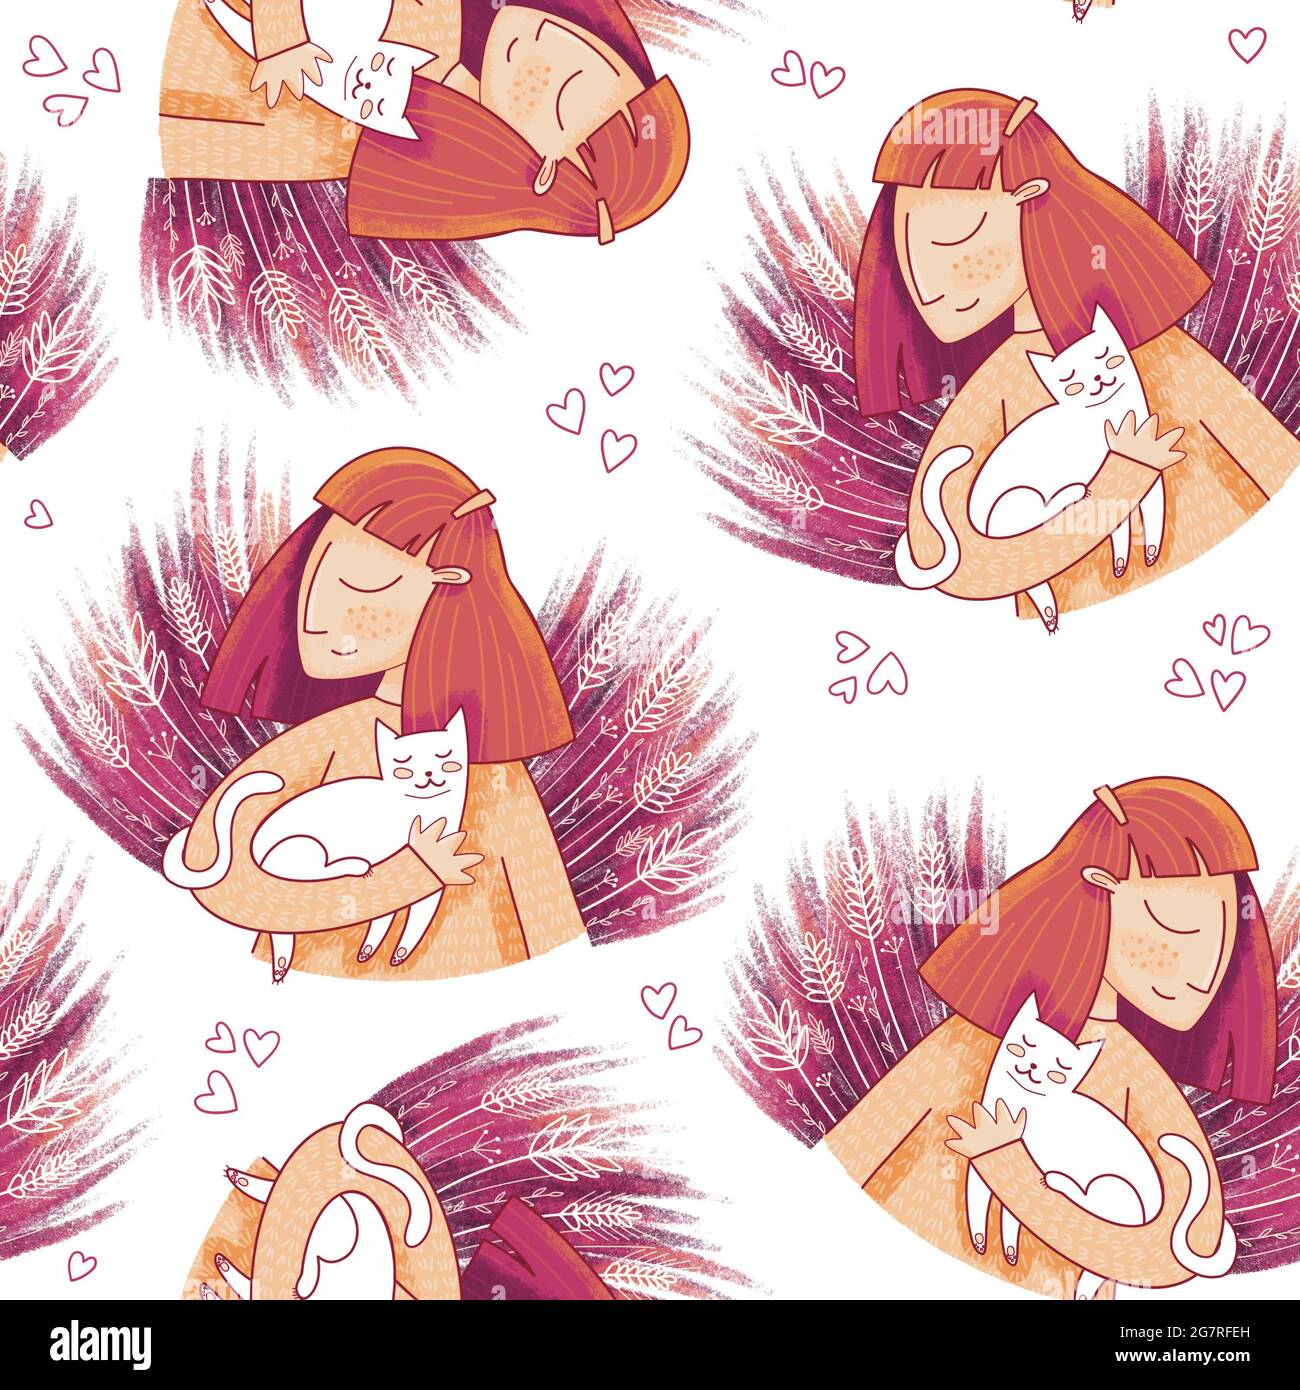 Cute seamless pattern with girl petting cat. Stock Photo